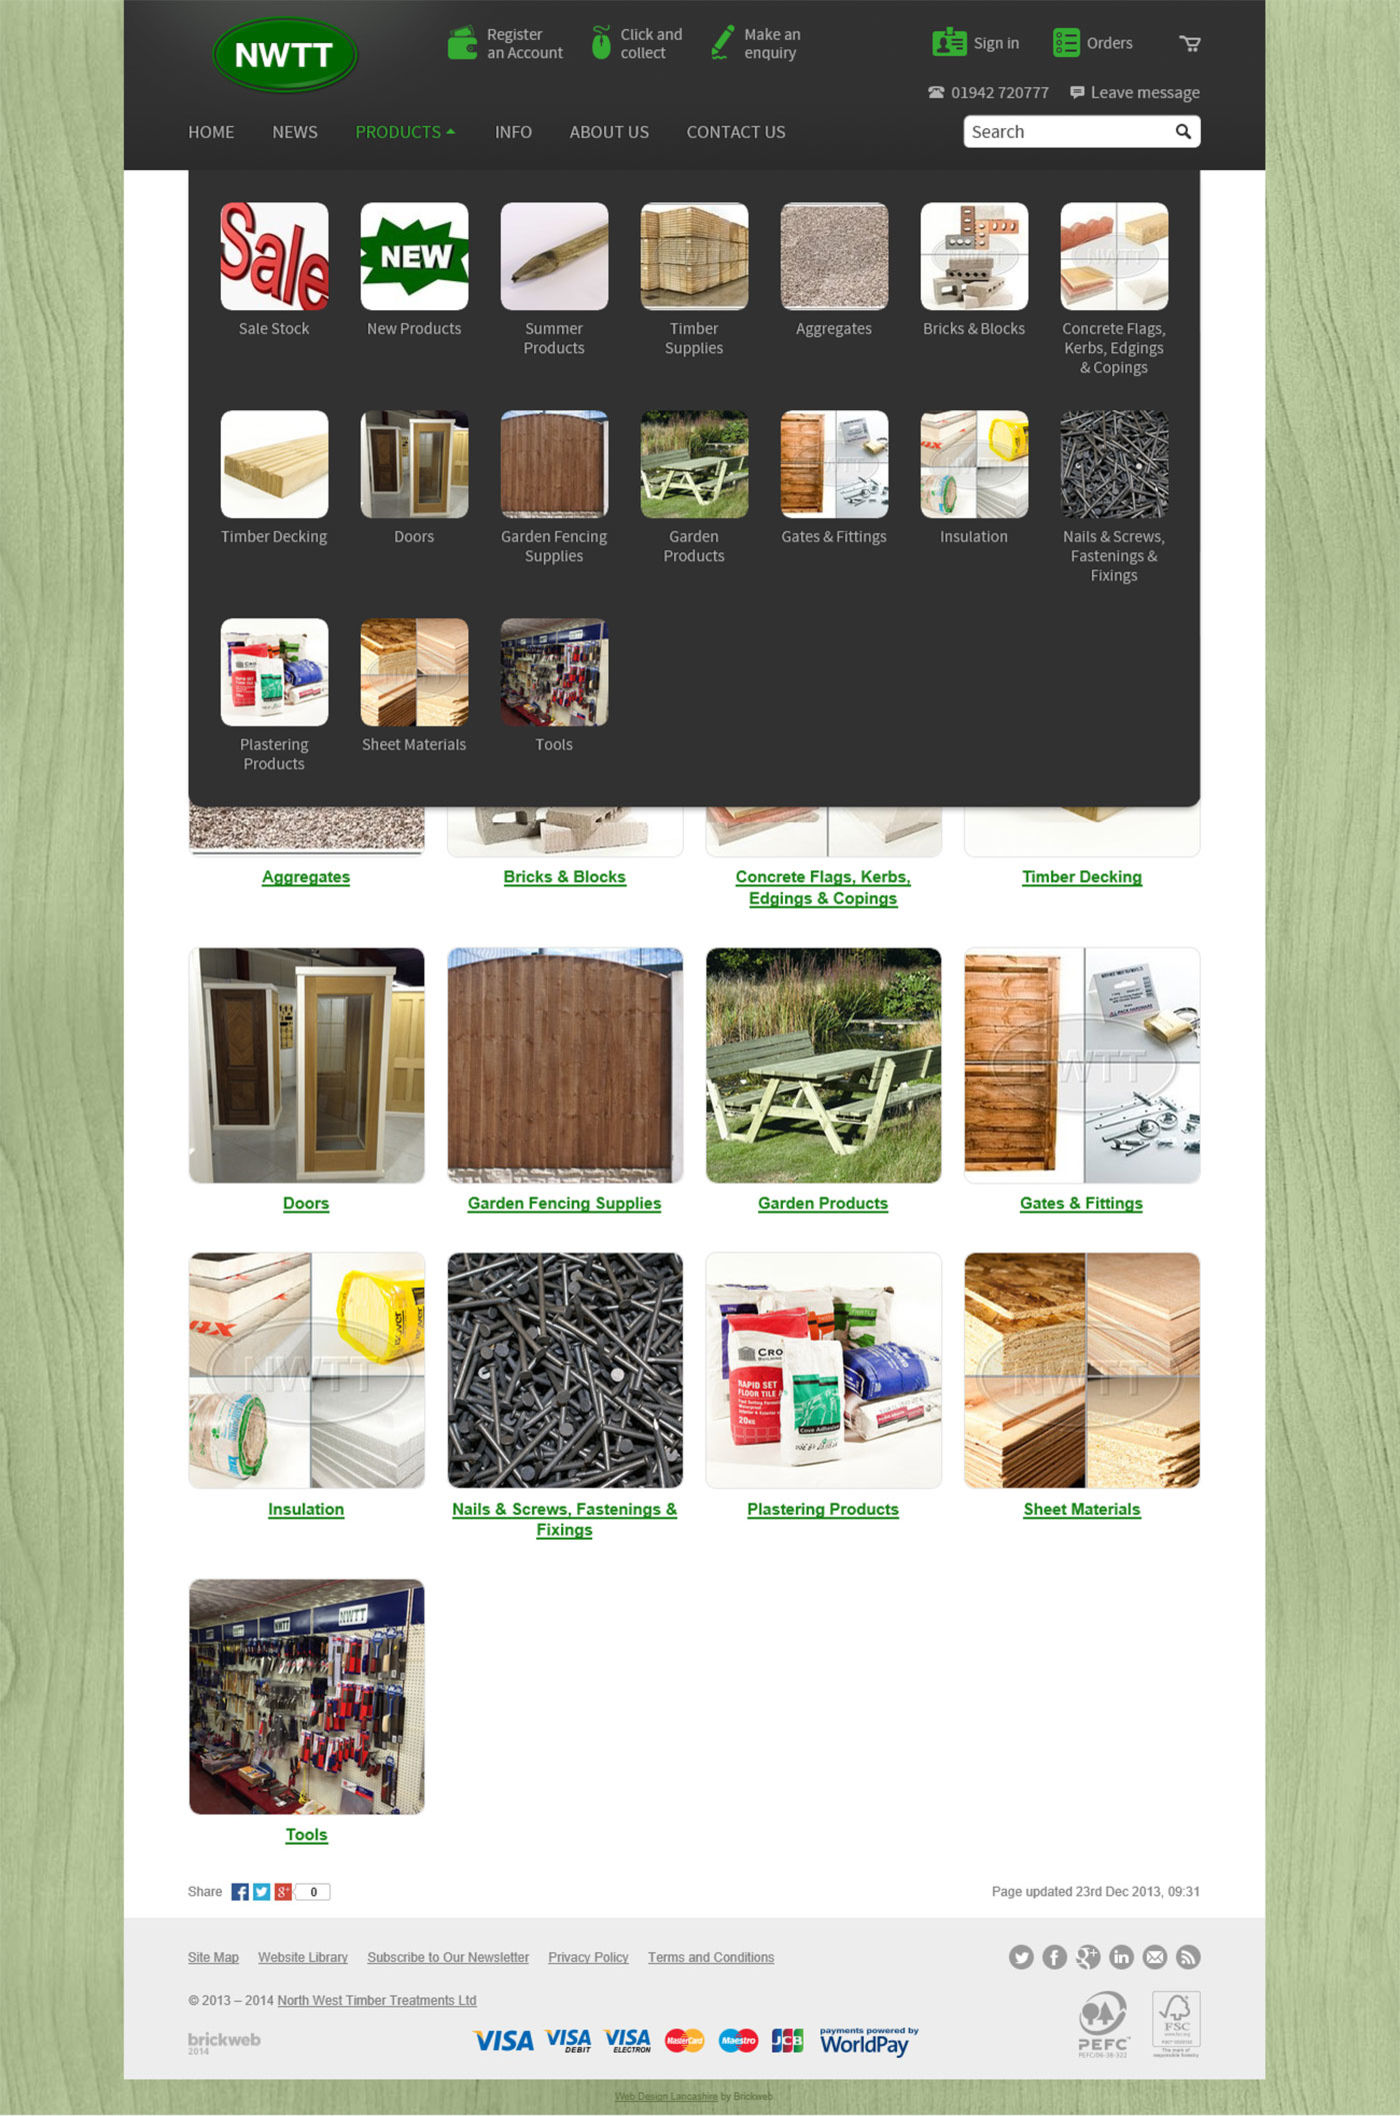 NWTT (2014) Products page